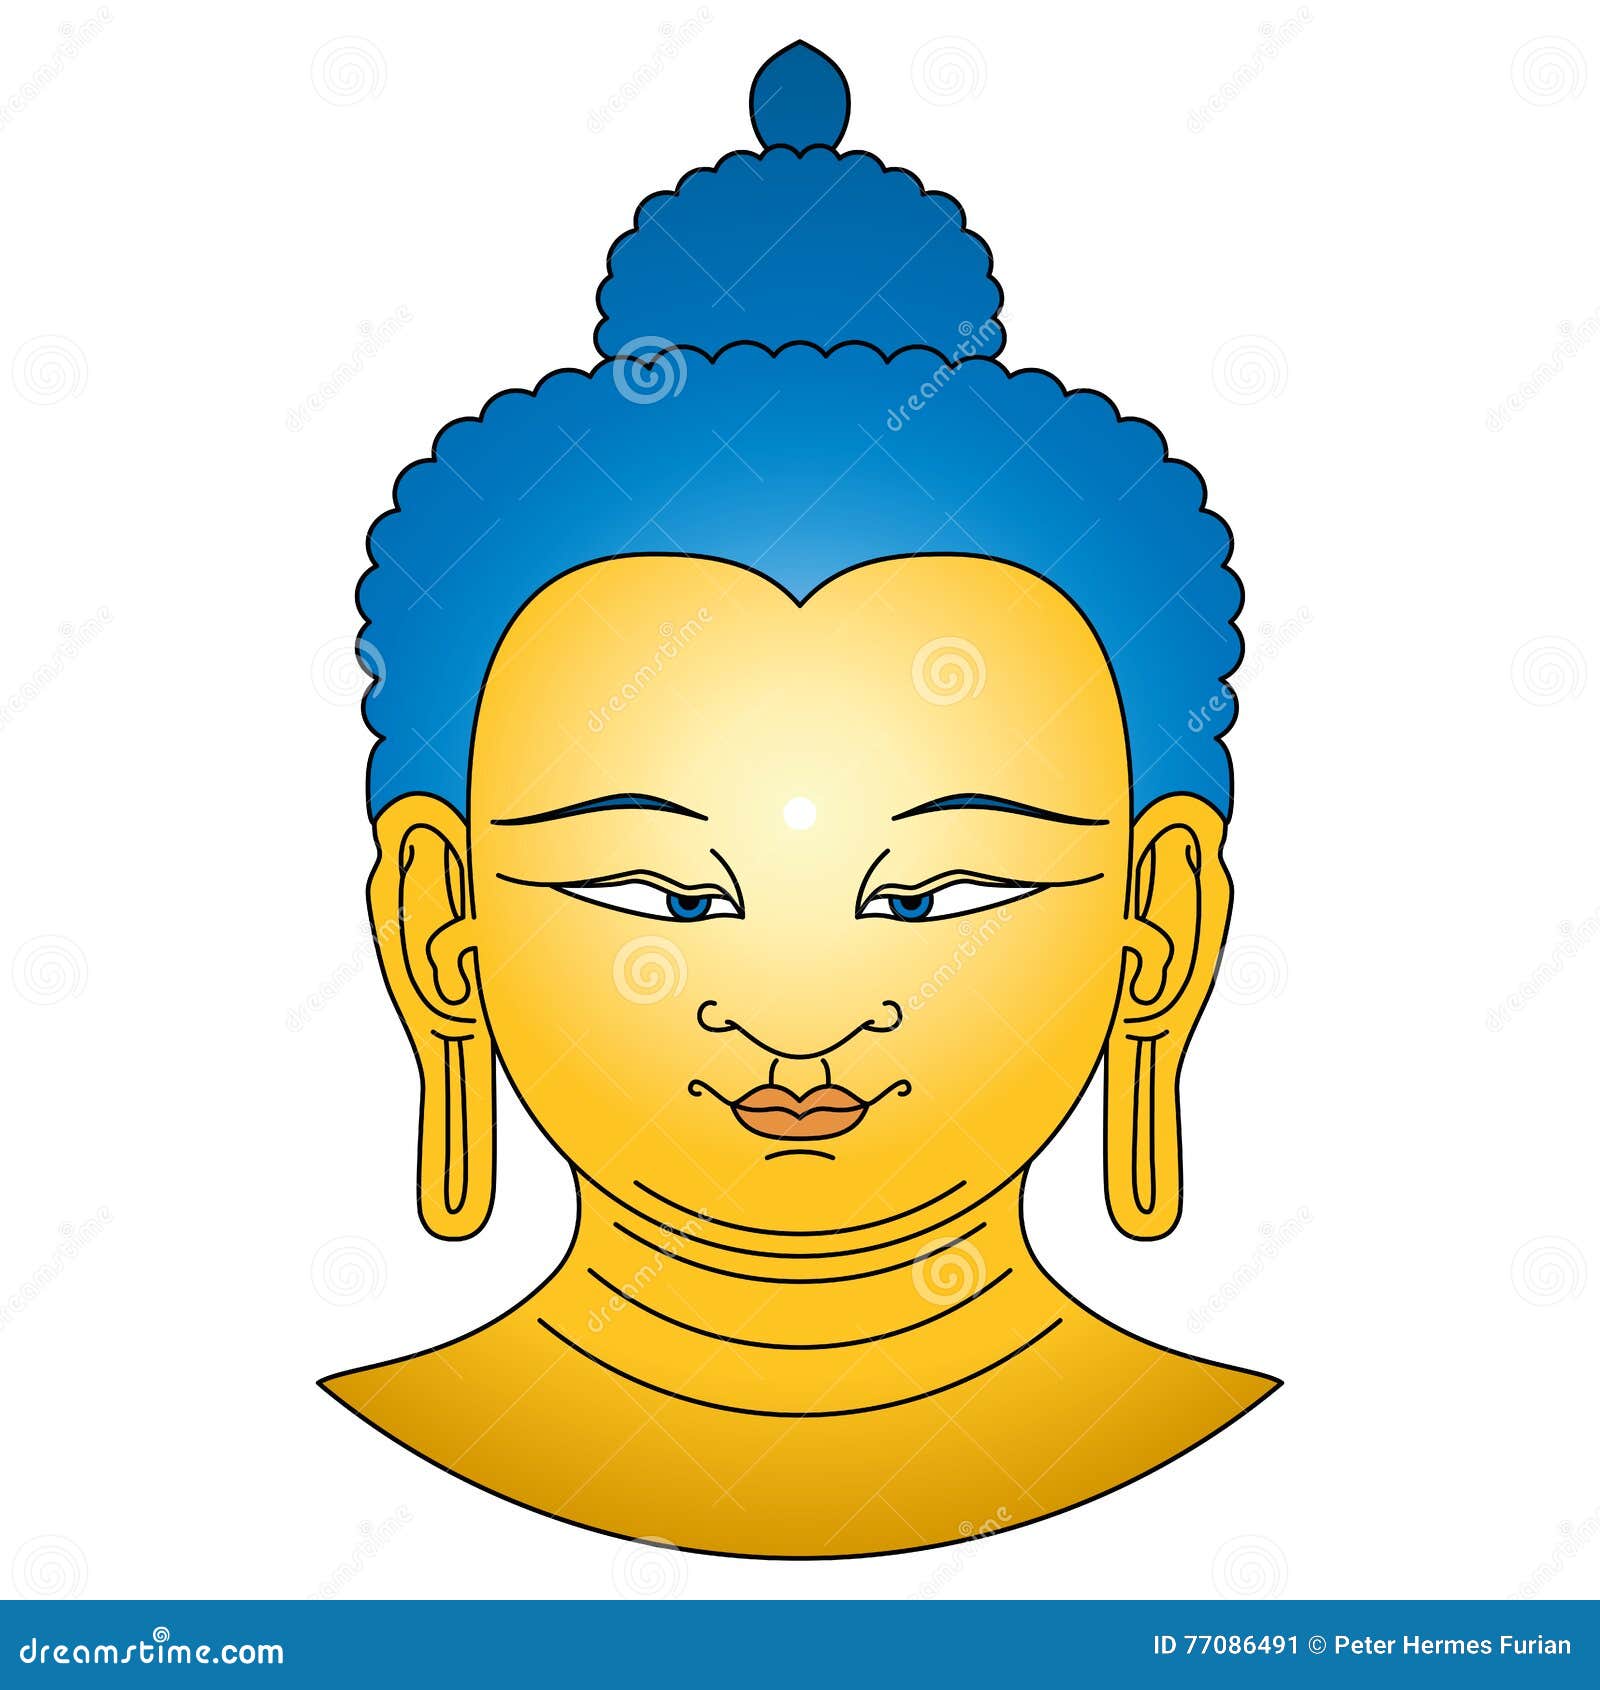 gold colored buddha head with blue hairs